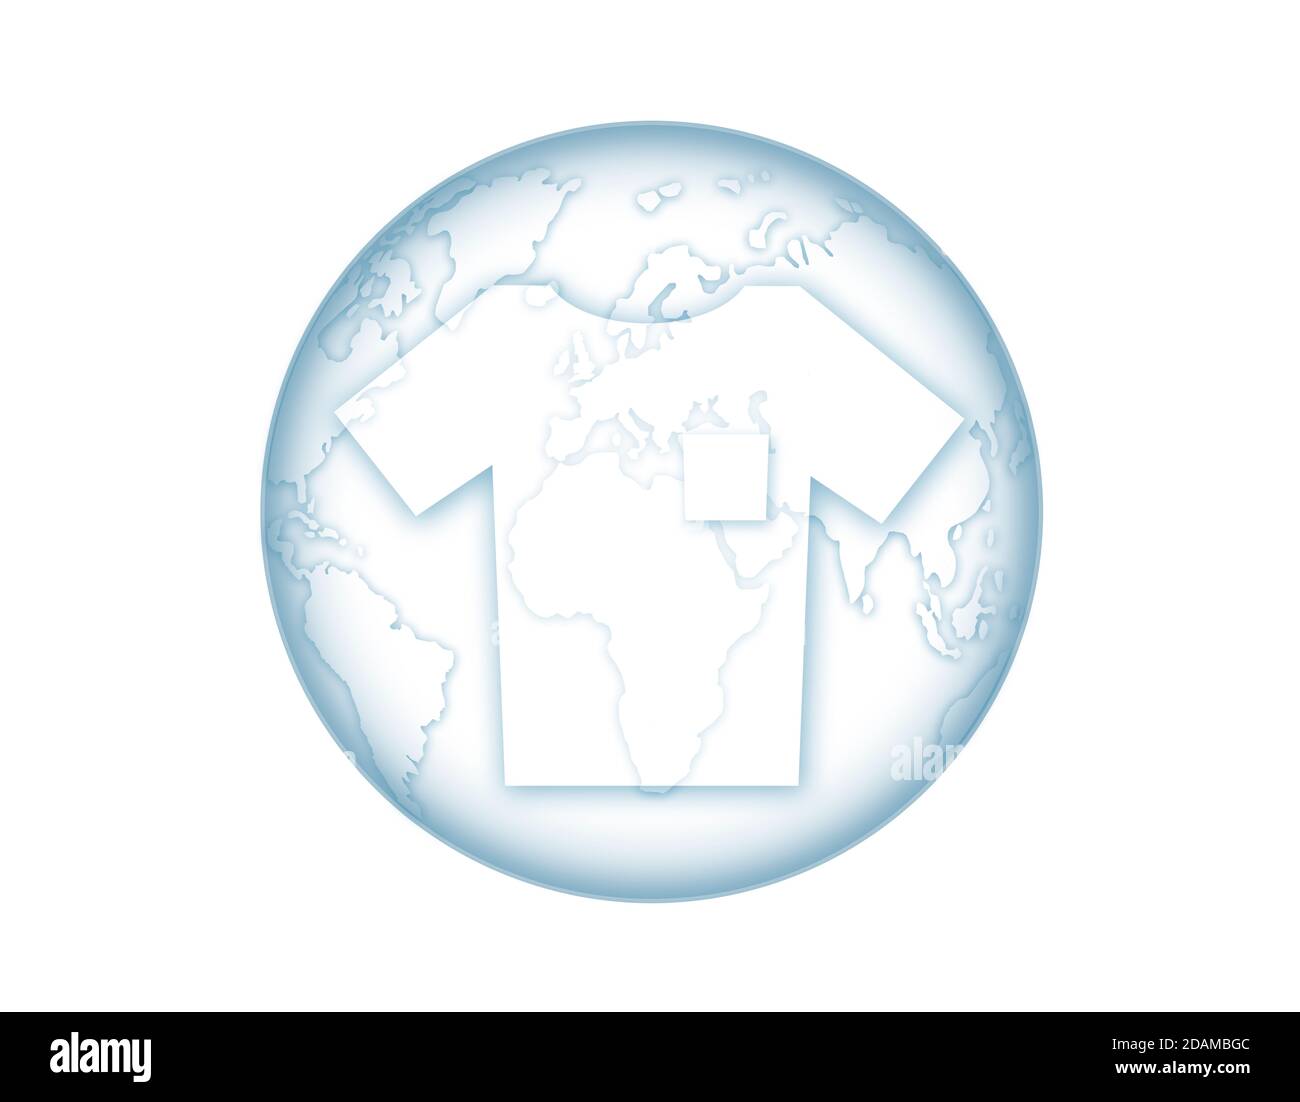 Earth and t-shirt, illustration. Stock Photo